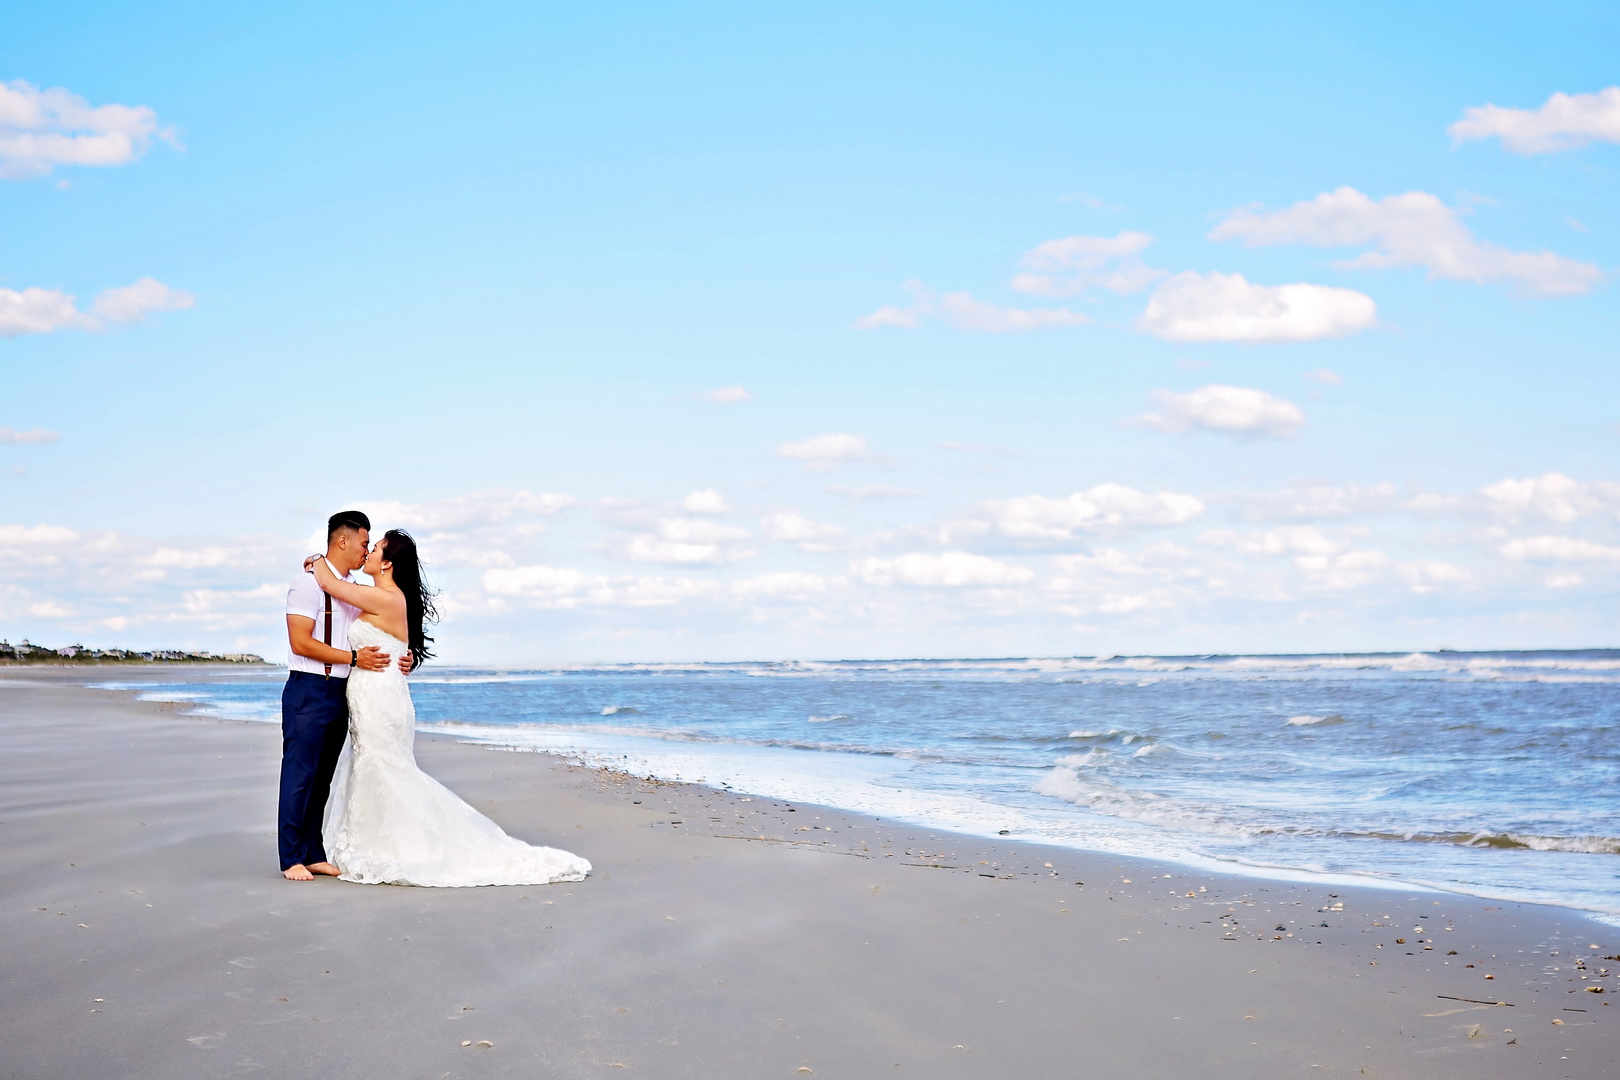 Bride and groom embrace and kiss on the beach in Isle of Palms, SC.